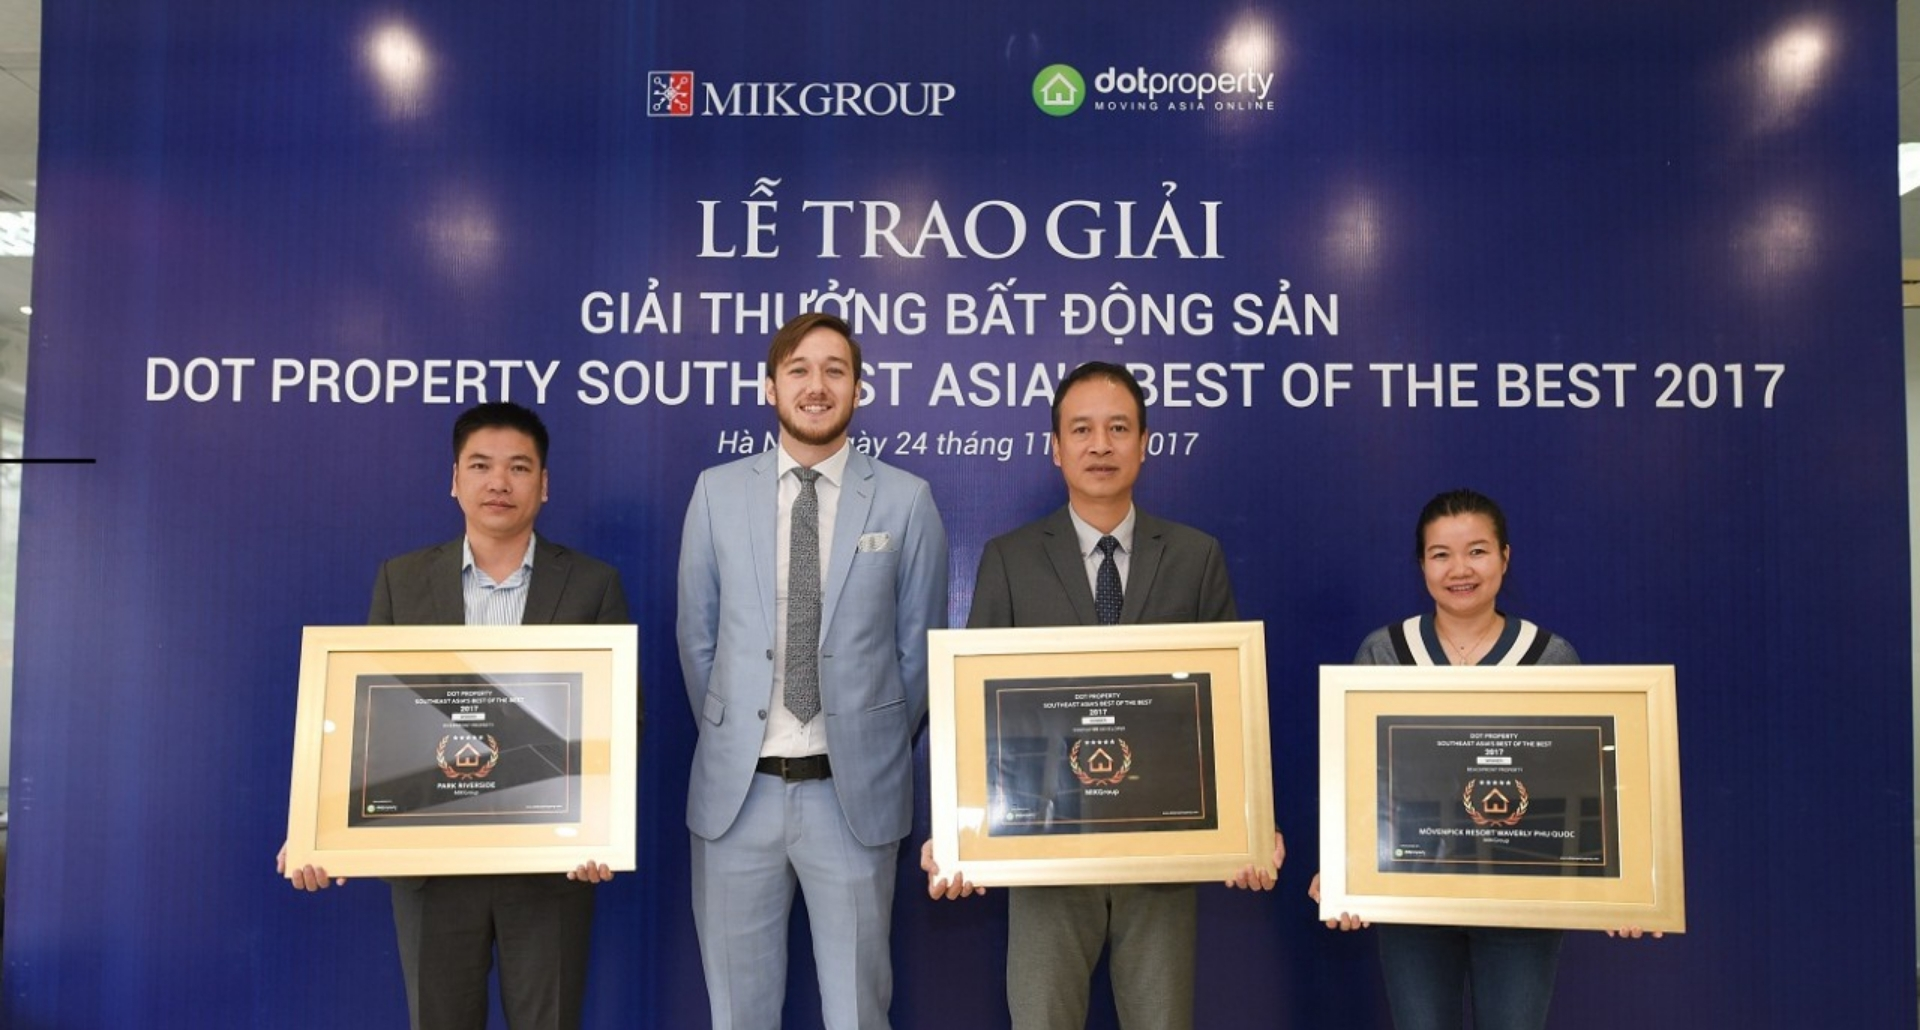 MIKGROUP HONORED THE MOST INNOVATIVE REAL ESTATE DEVELOPERS